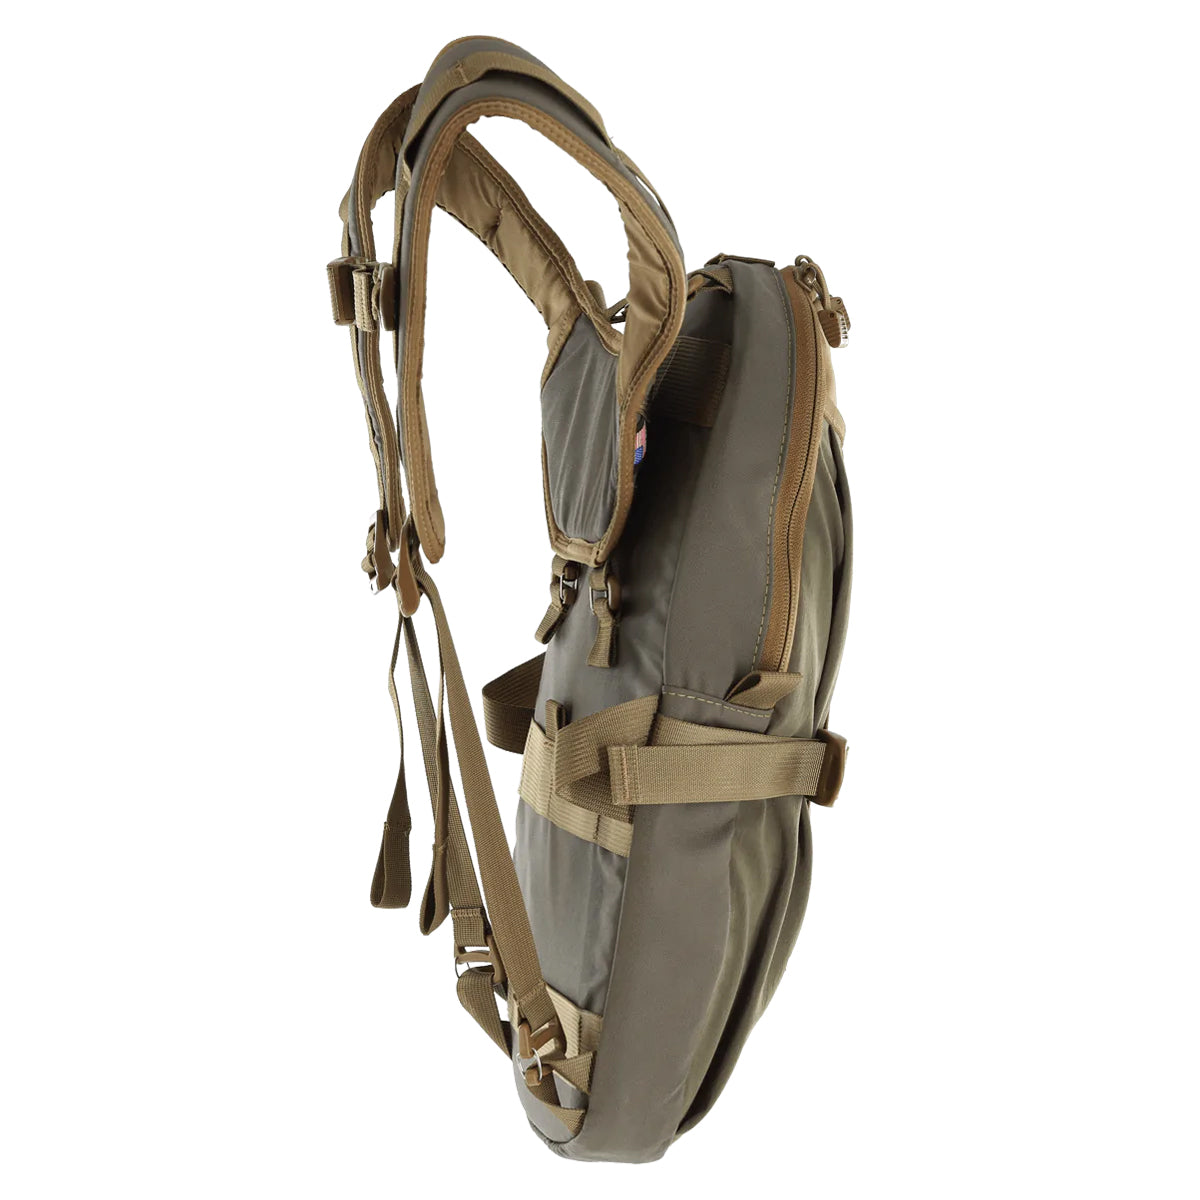 Marsupial Gear Hydration Pack